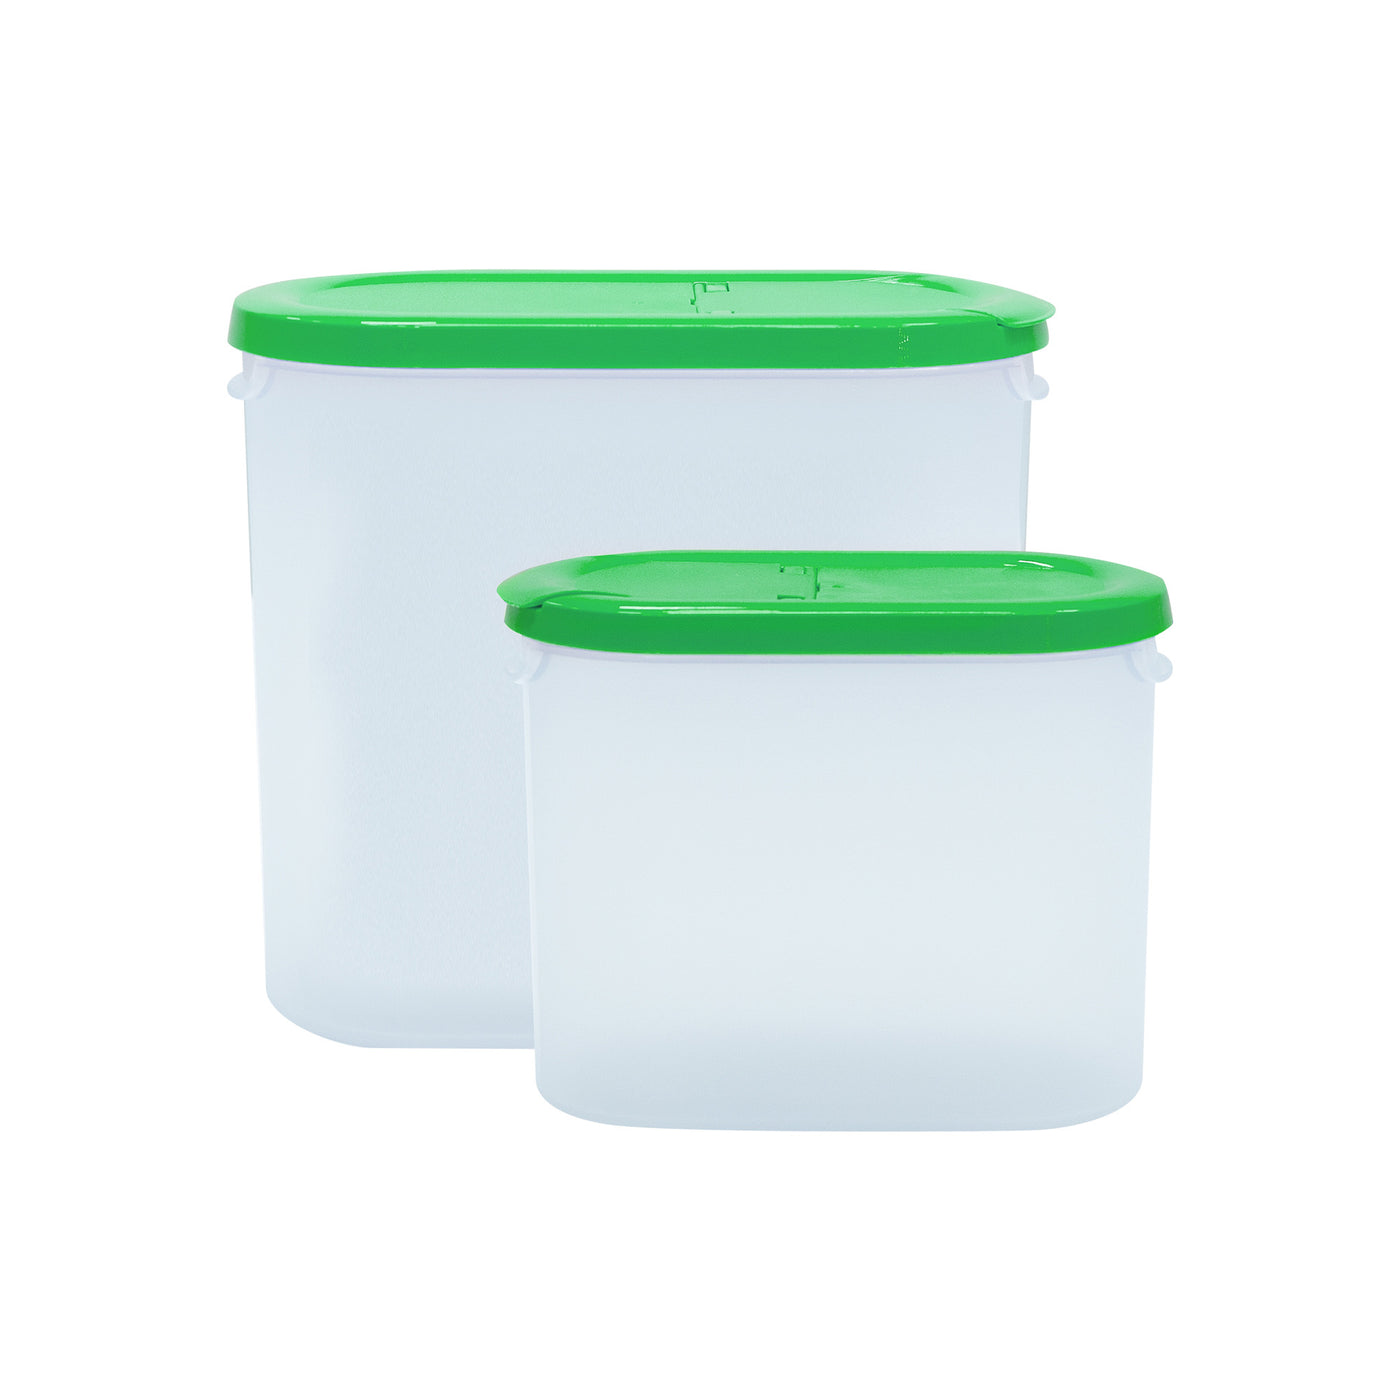 OSH Oval Food Container 2-Piece Set 18.10x18.5x8.5cm